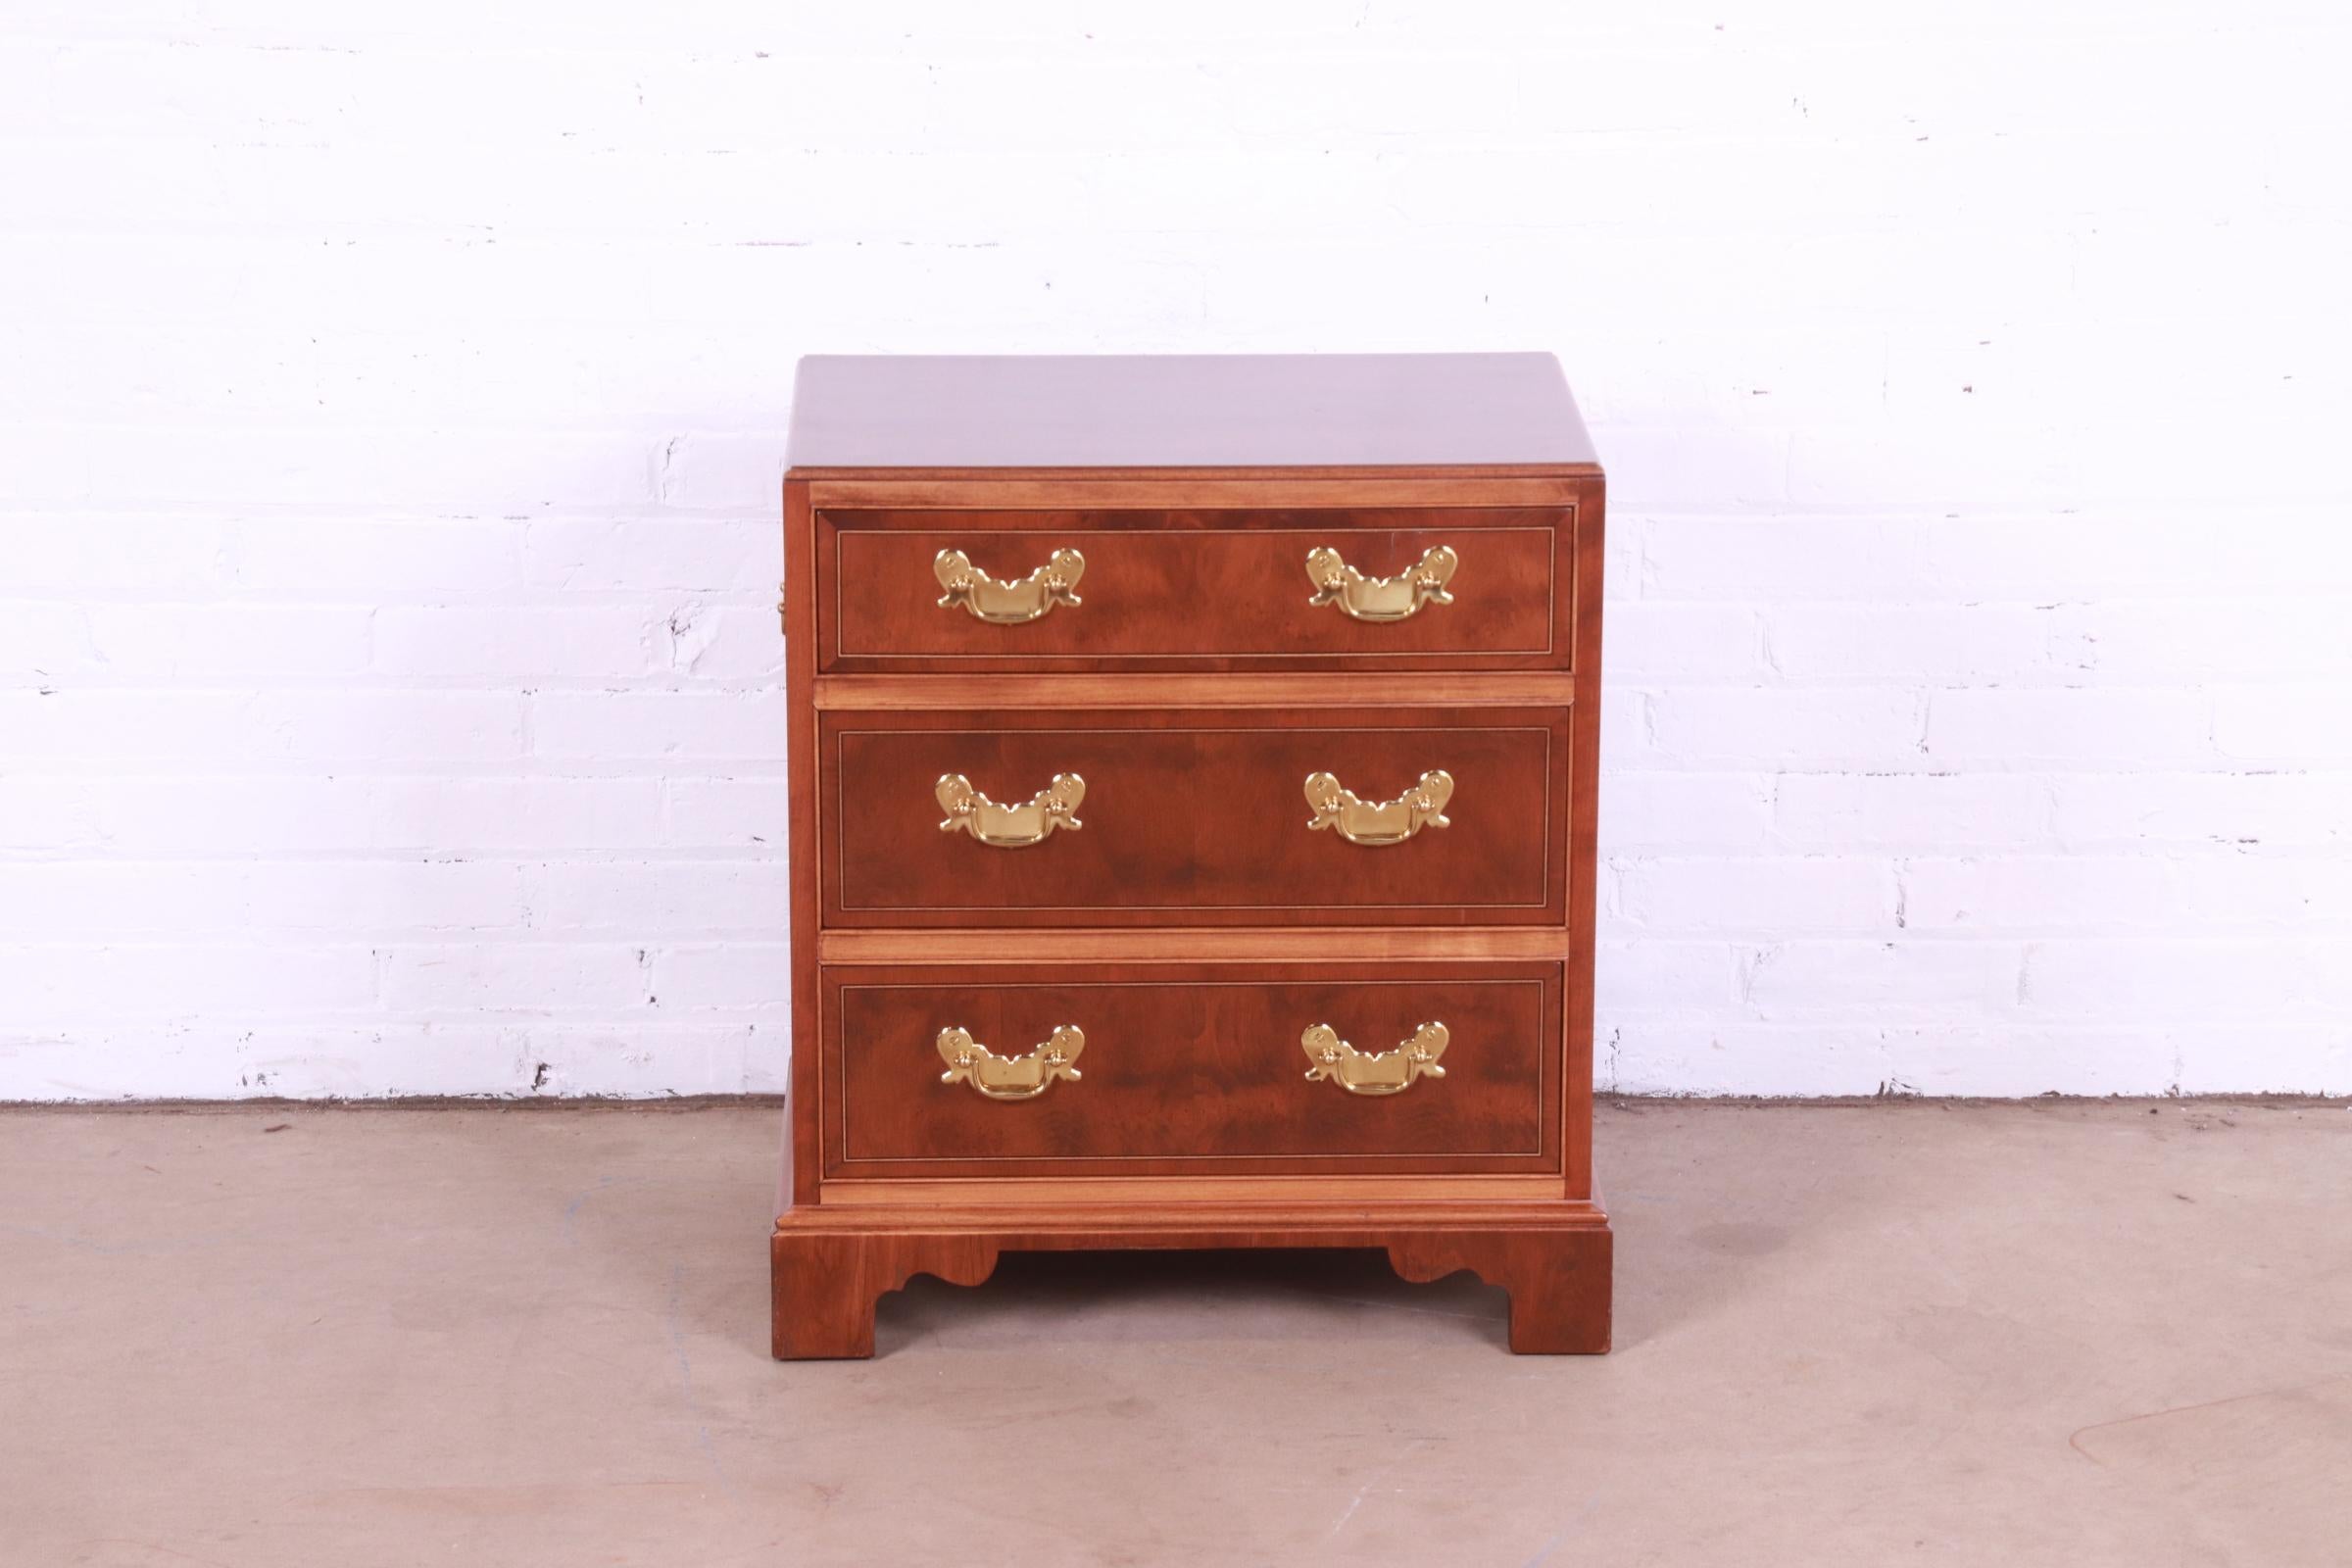 A beautiful Georgian style three-drawer commode or chest of drawers

By Baker Furniture

USA, Circa 1980s

Mahogany and yew wood, with original brass hardware.

Measures: 23